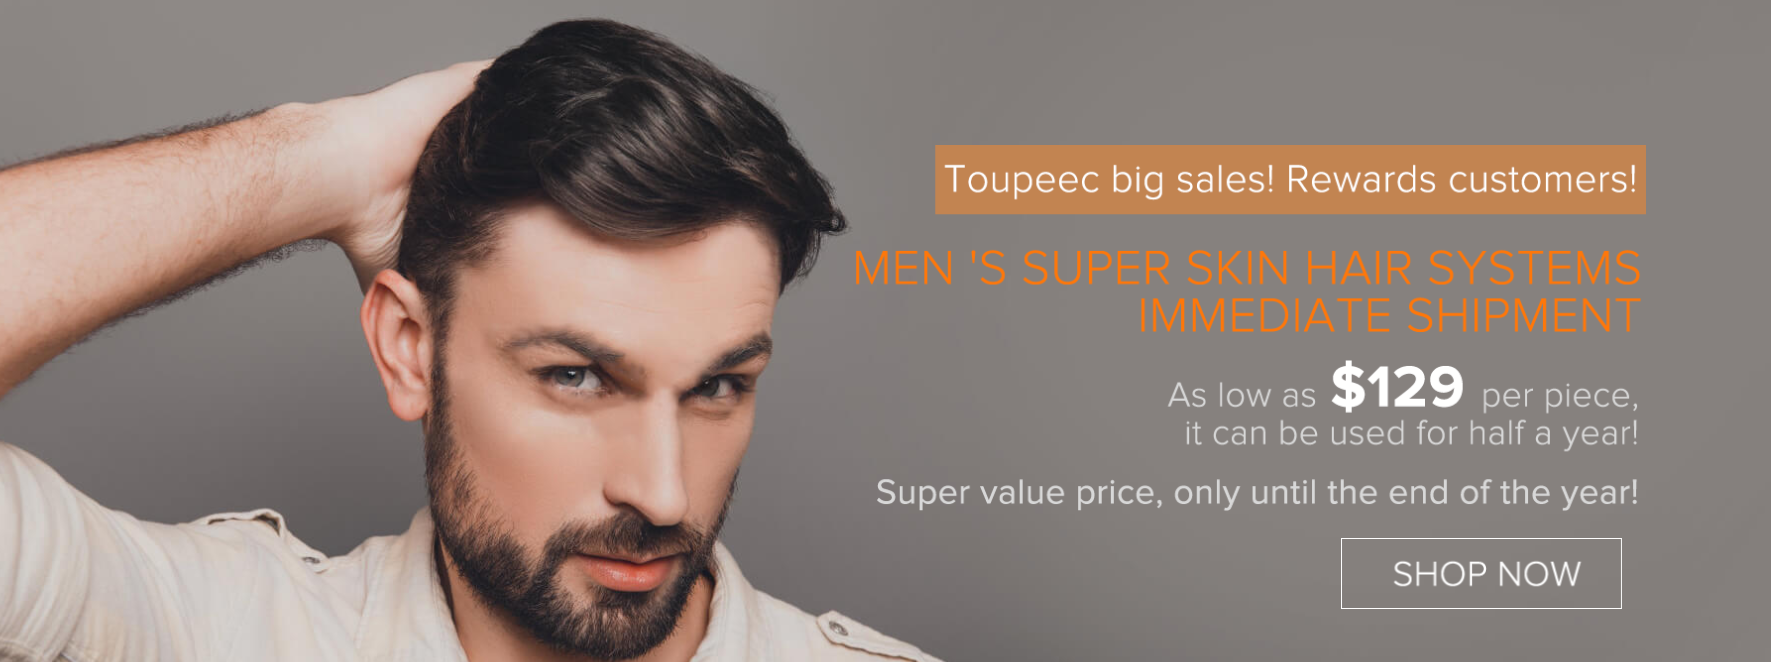 hairpiece and toupee for men